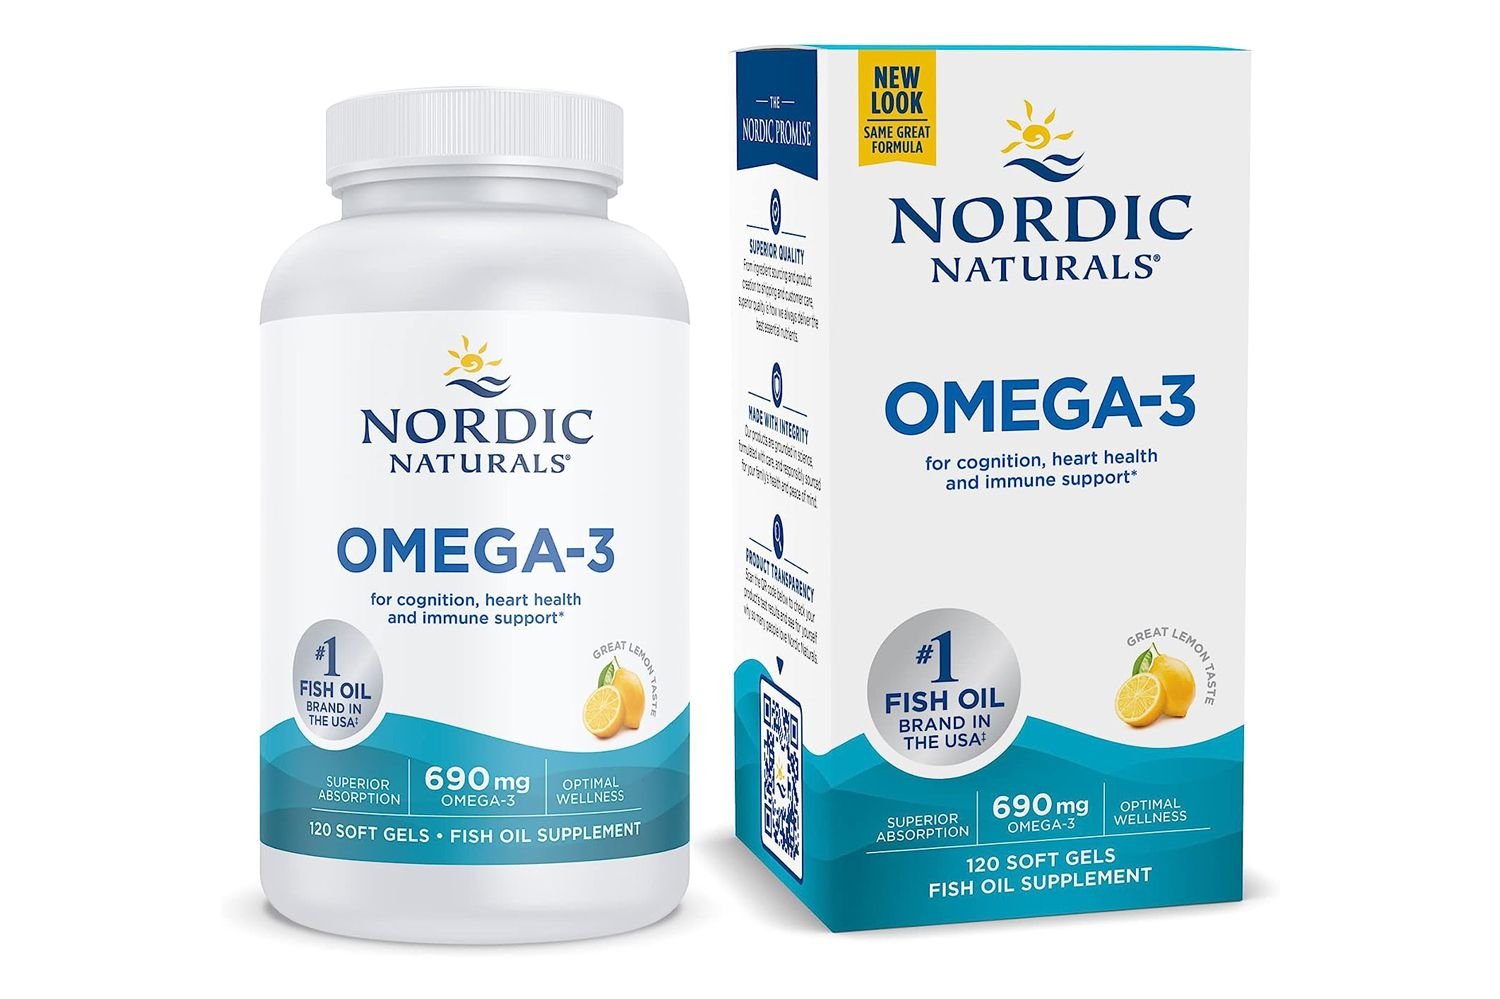 What is the Best Omega 3 Supplement on the Market